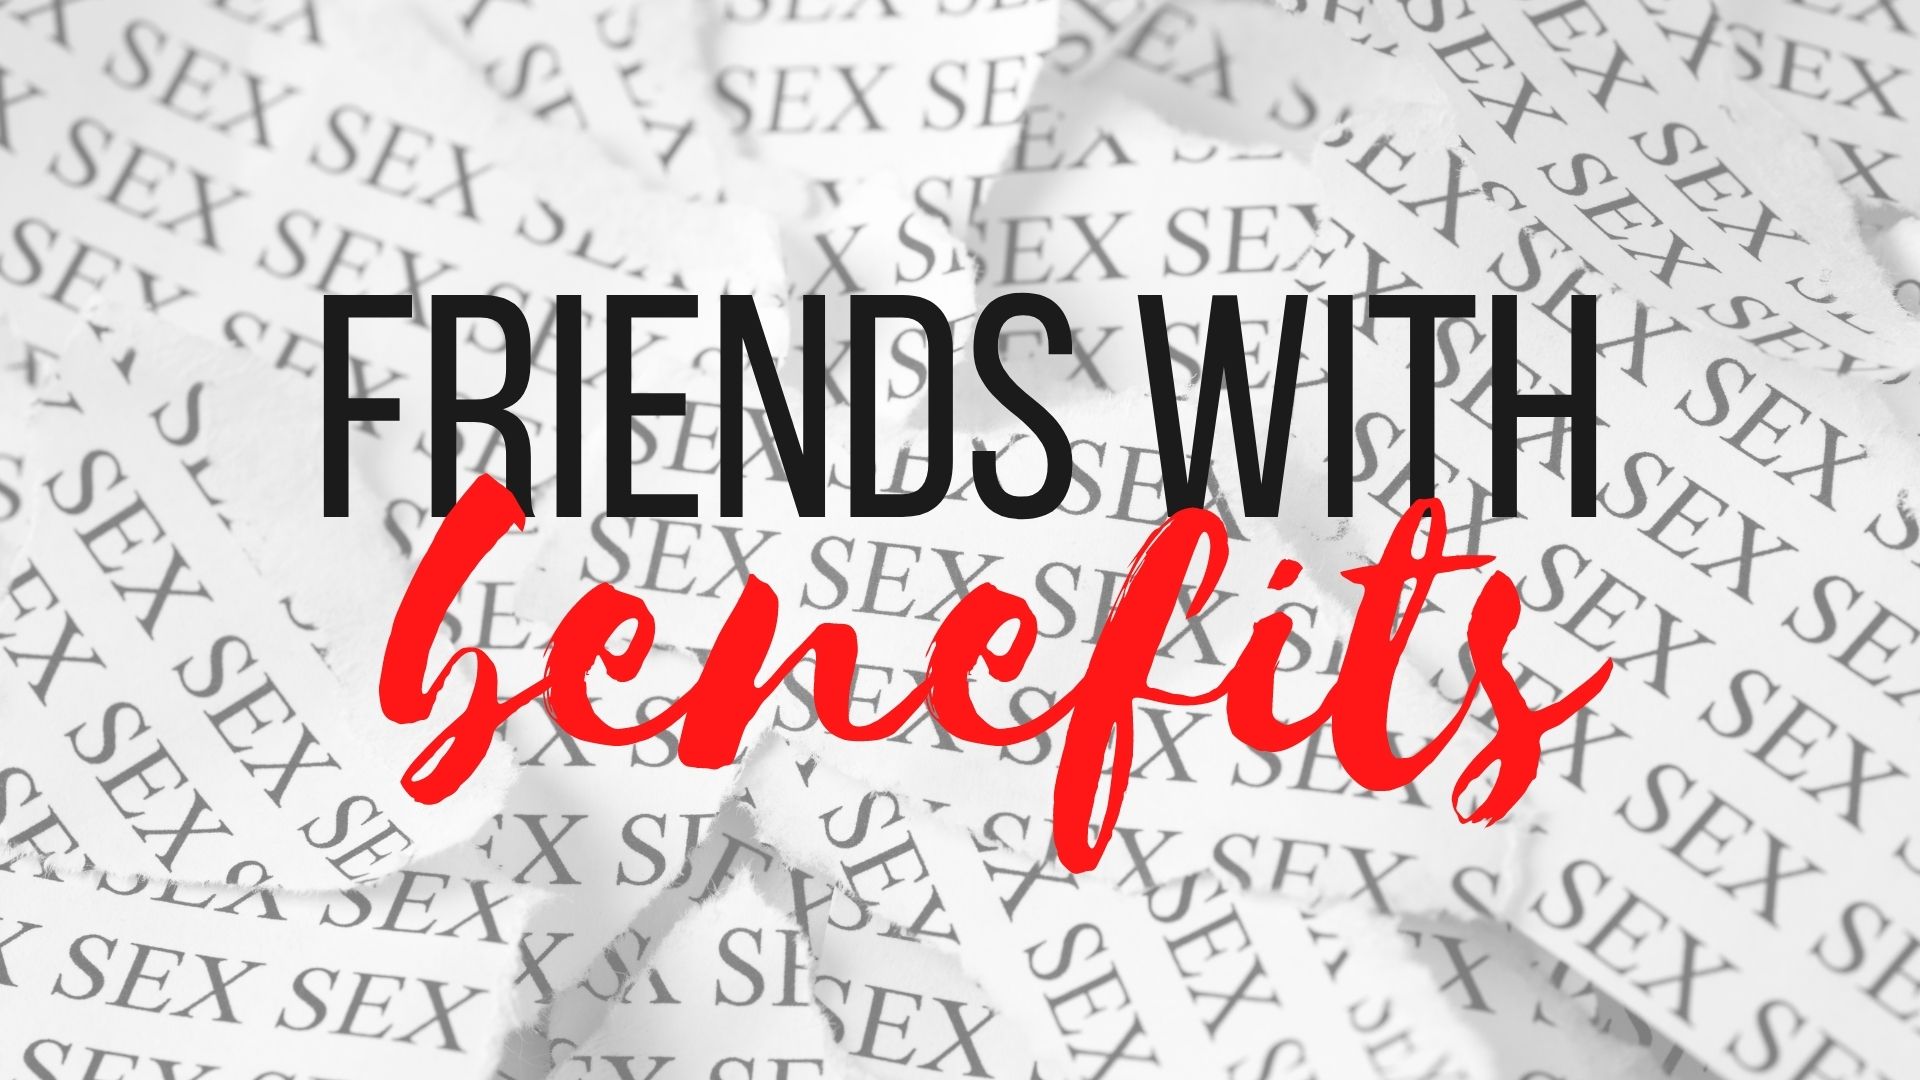 Friends with benefits co to